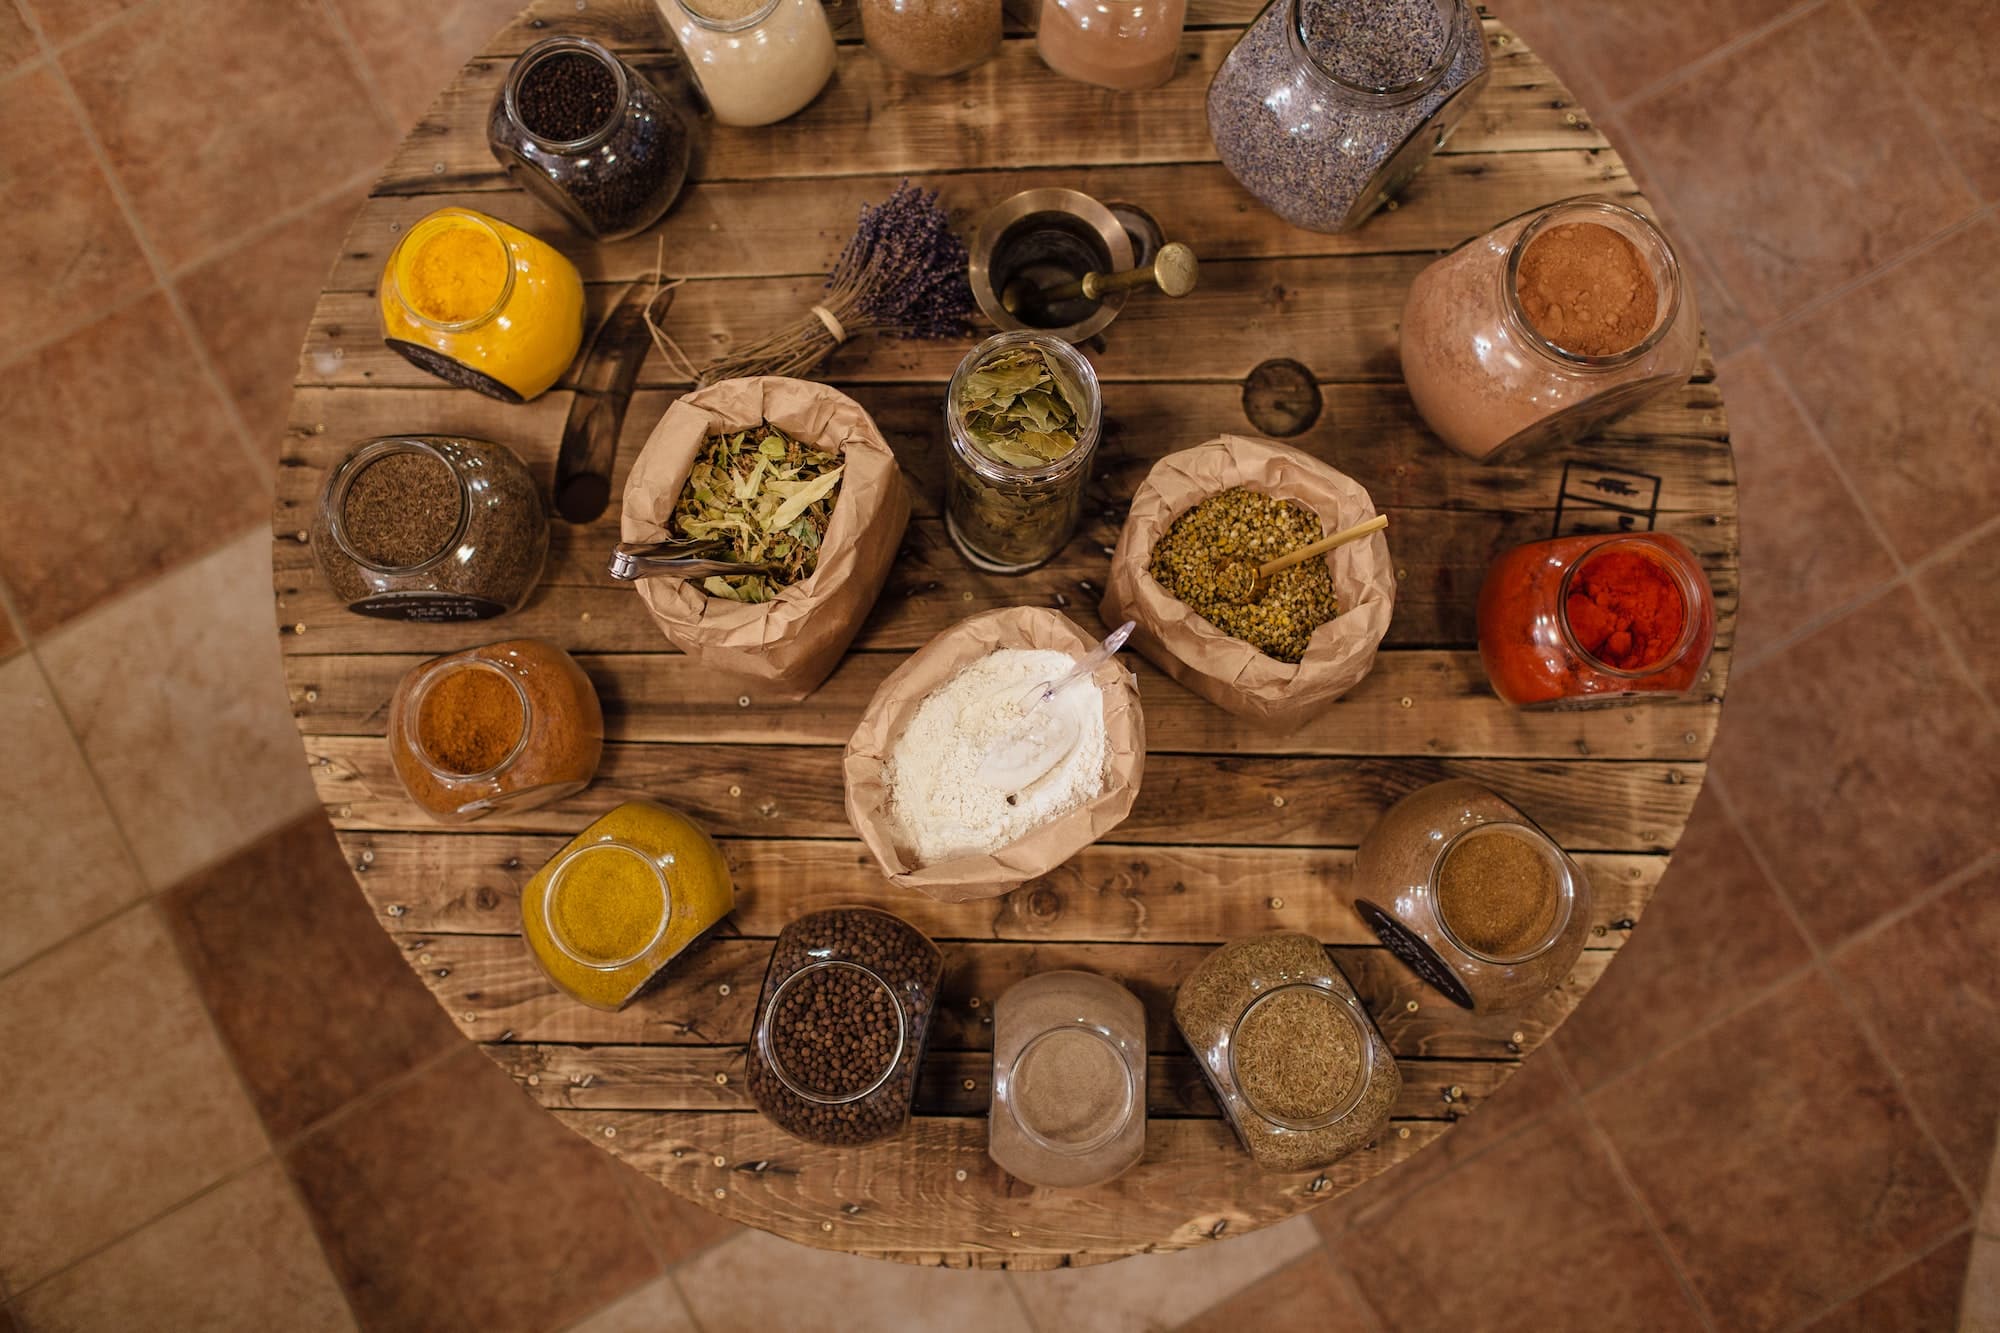 Variety of colorful dried herbs and spices displayed on round wooden table in plastic free store.